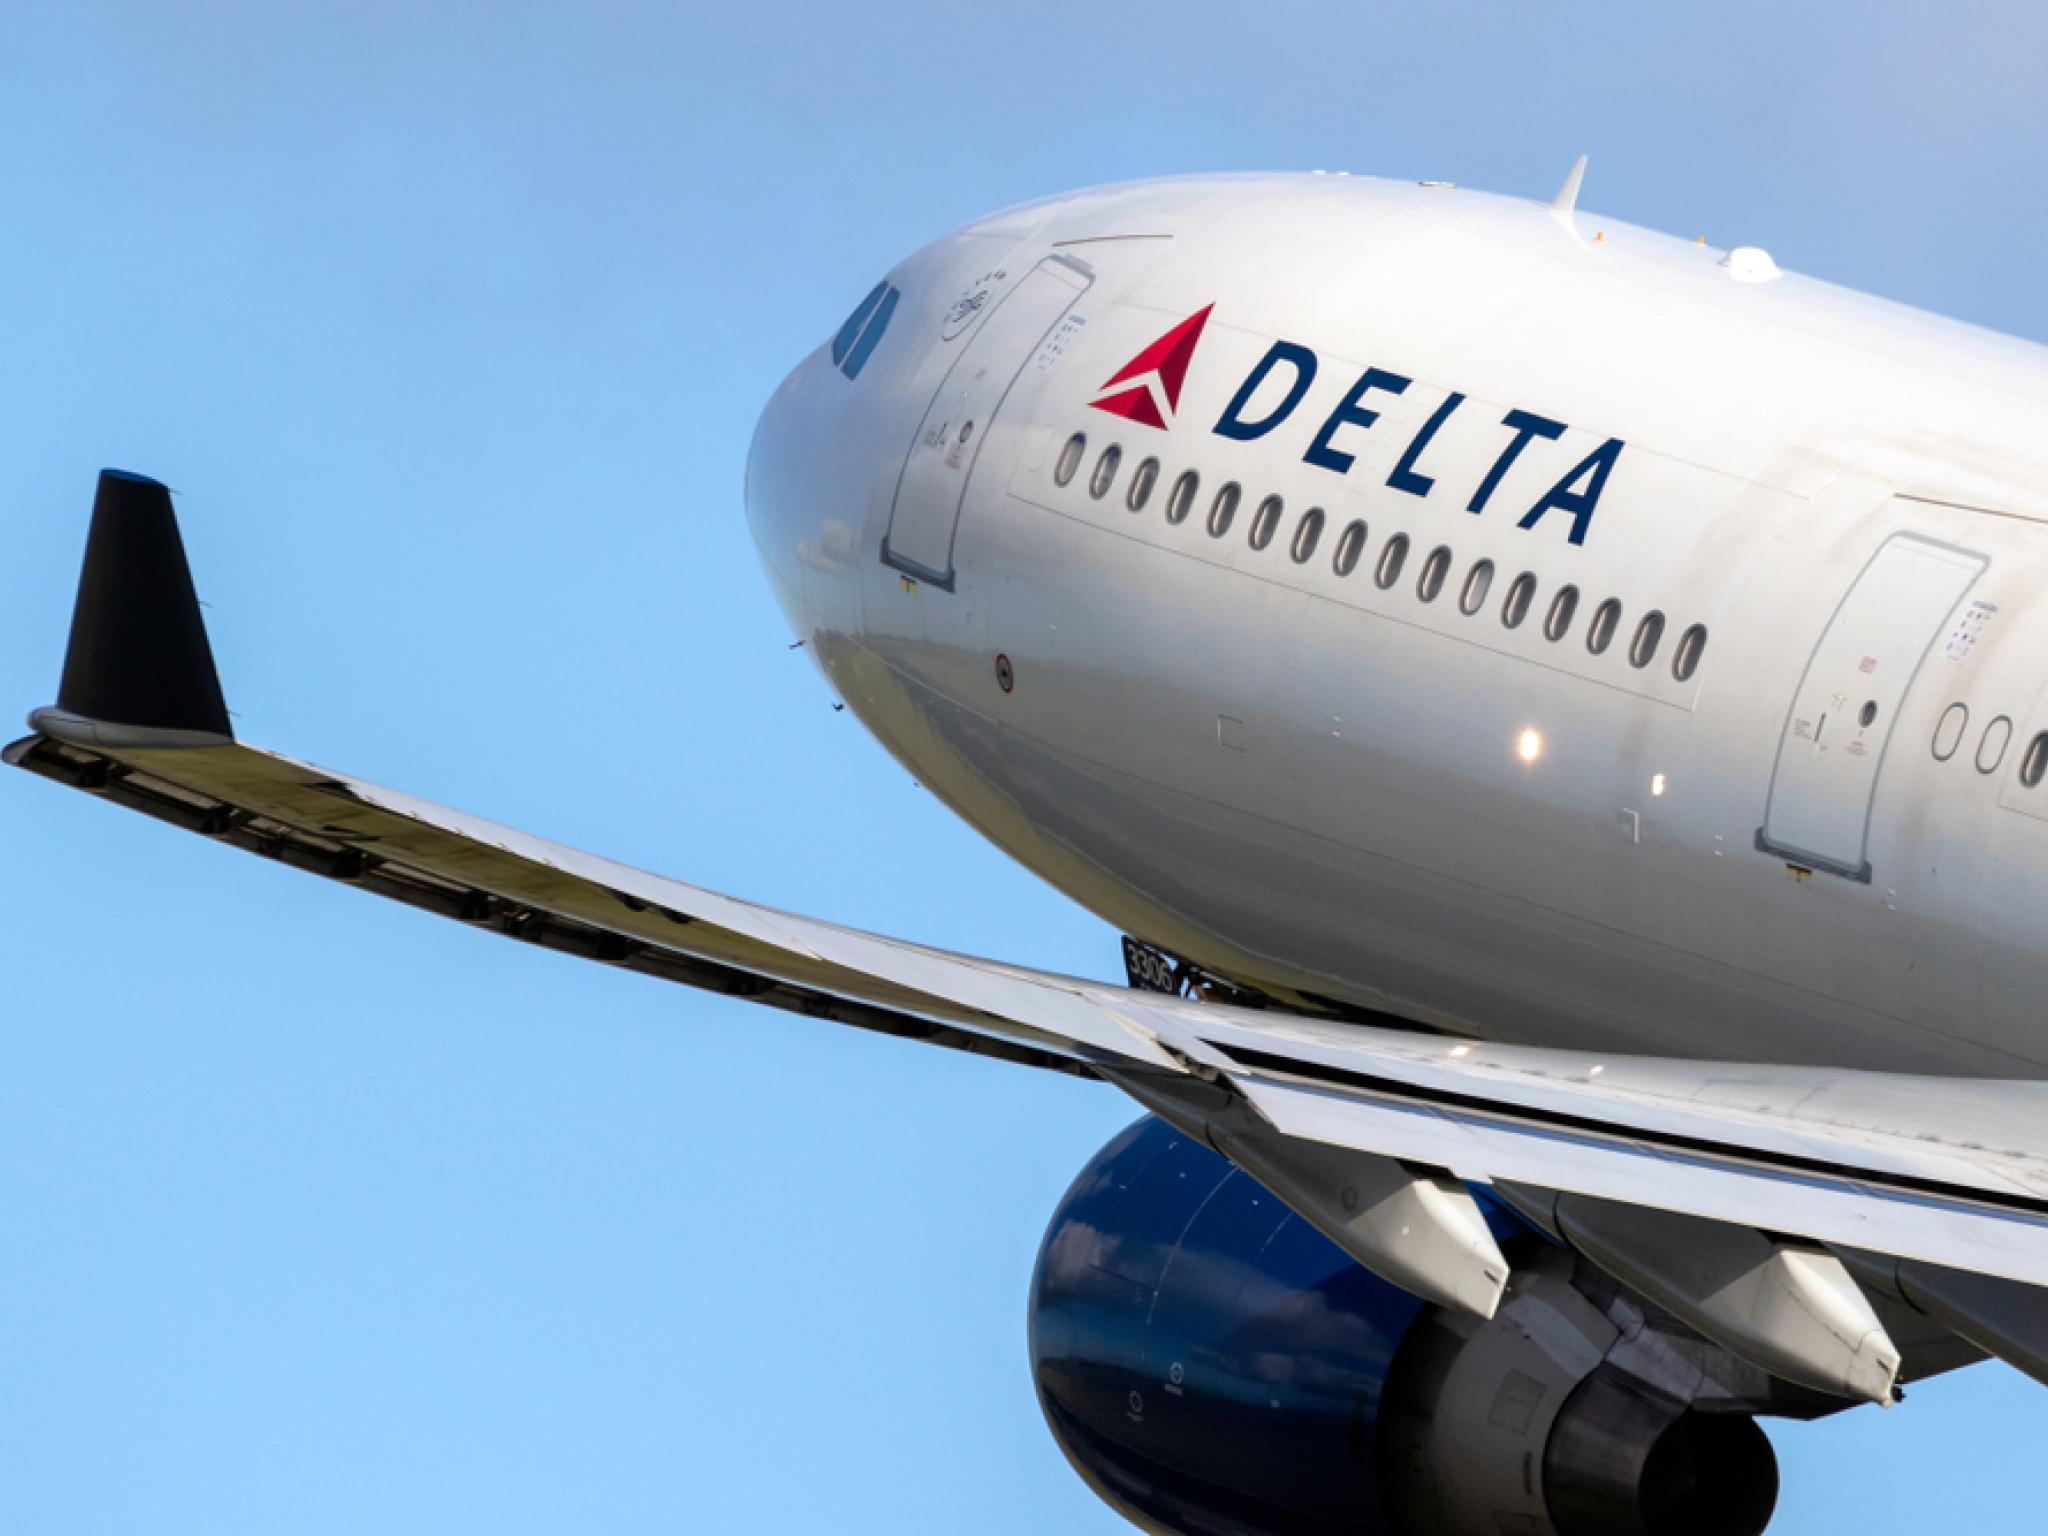  netflix-delta-air-lines-and-hubspot-are-among-top-10-large-stocks-that-performed-worst-this-week-july-7-july-13-are-the-others-in-your-portfolio 